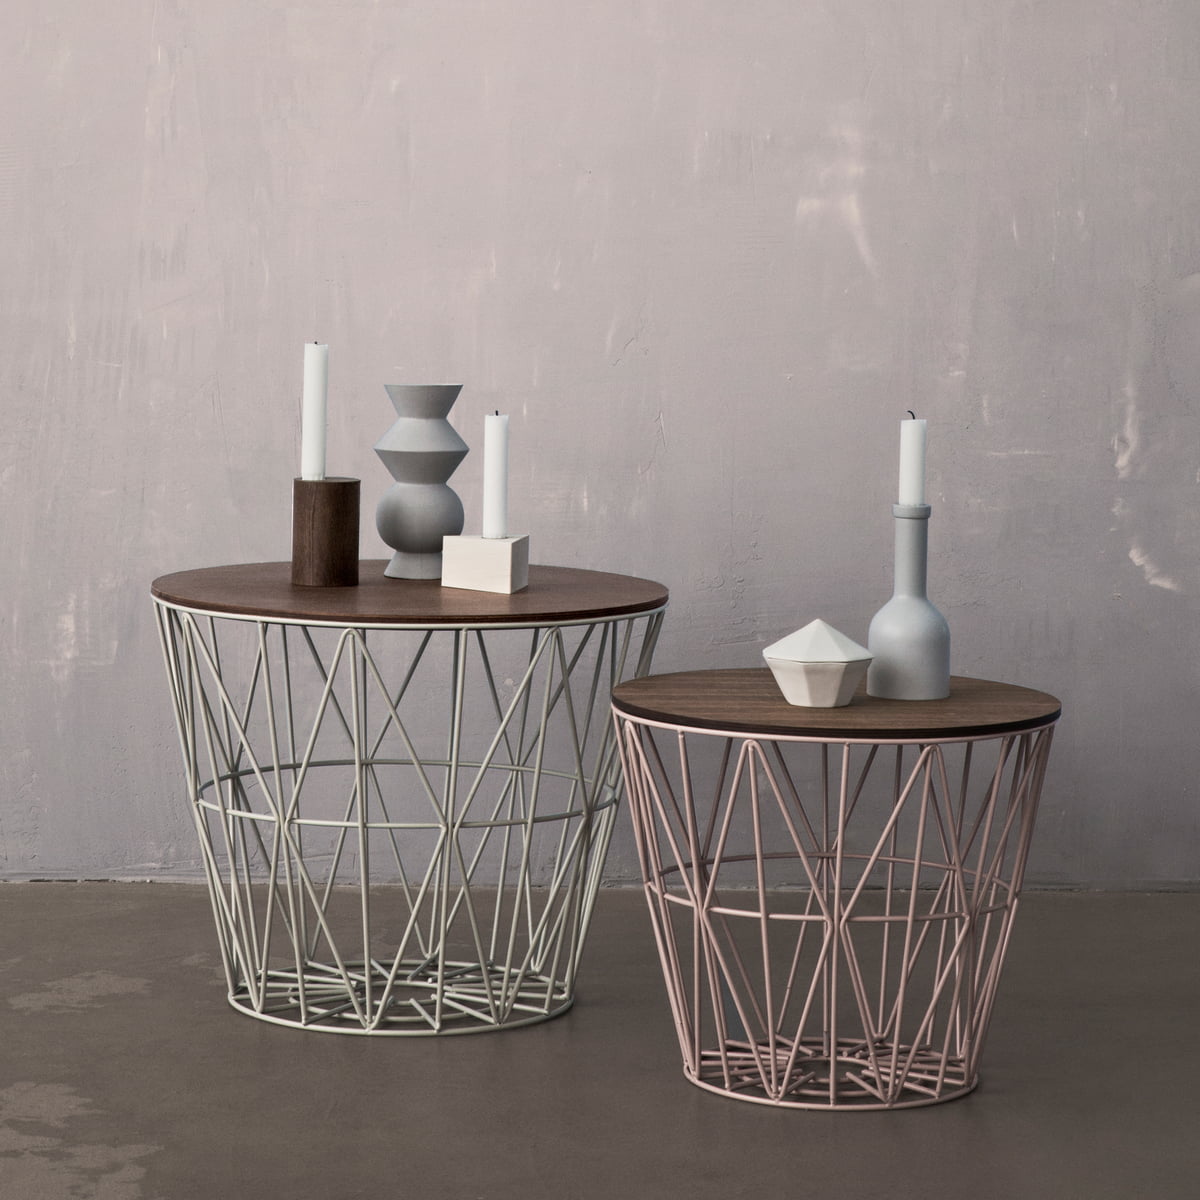 straf Bovenstaande Zus The small Wire Basket from ferm Living